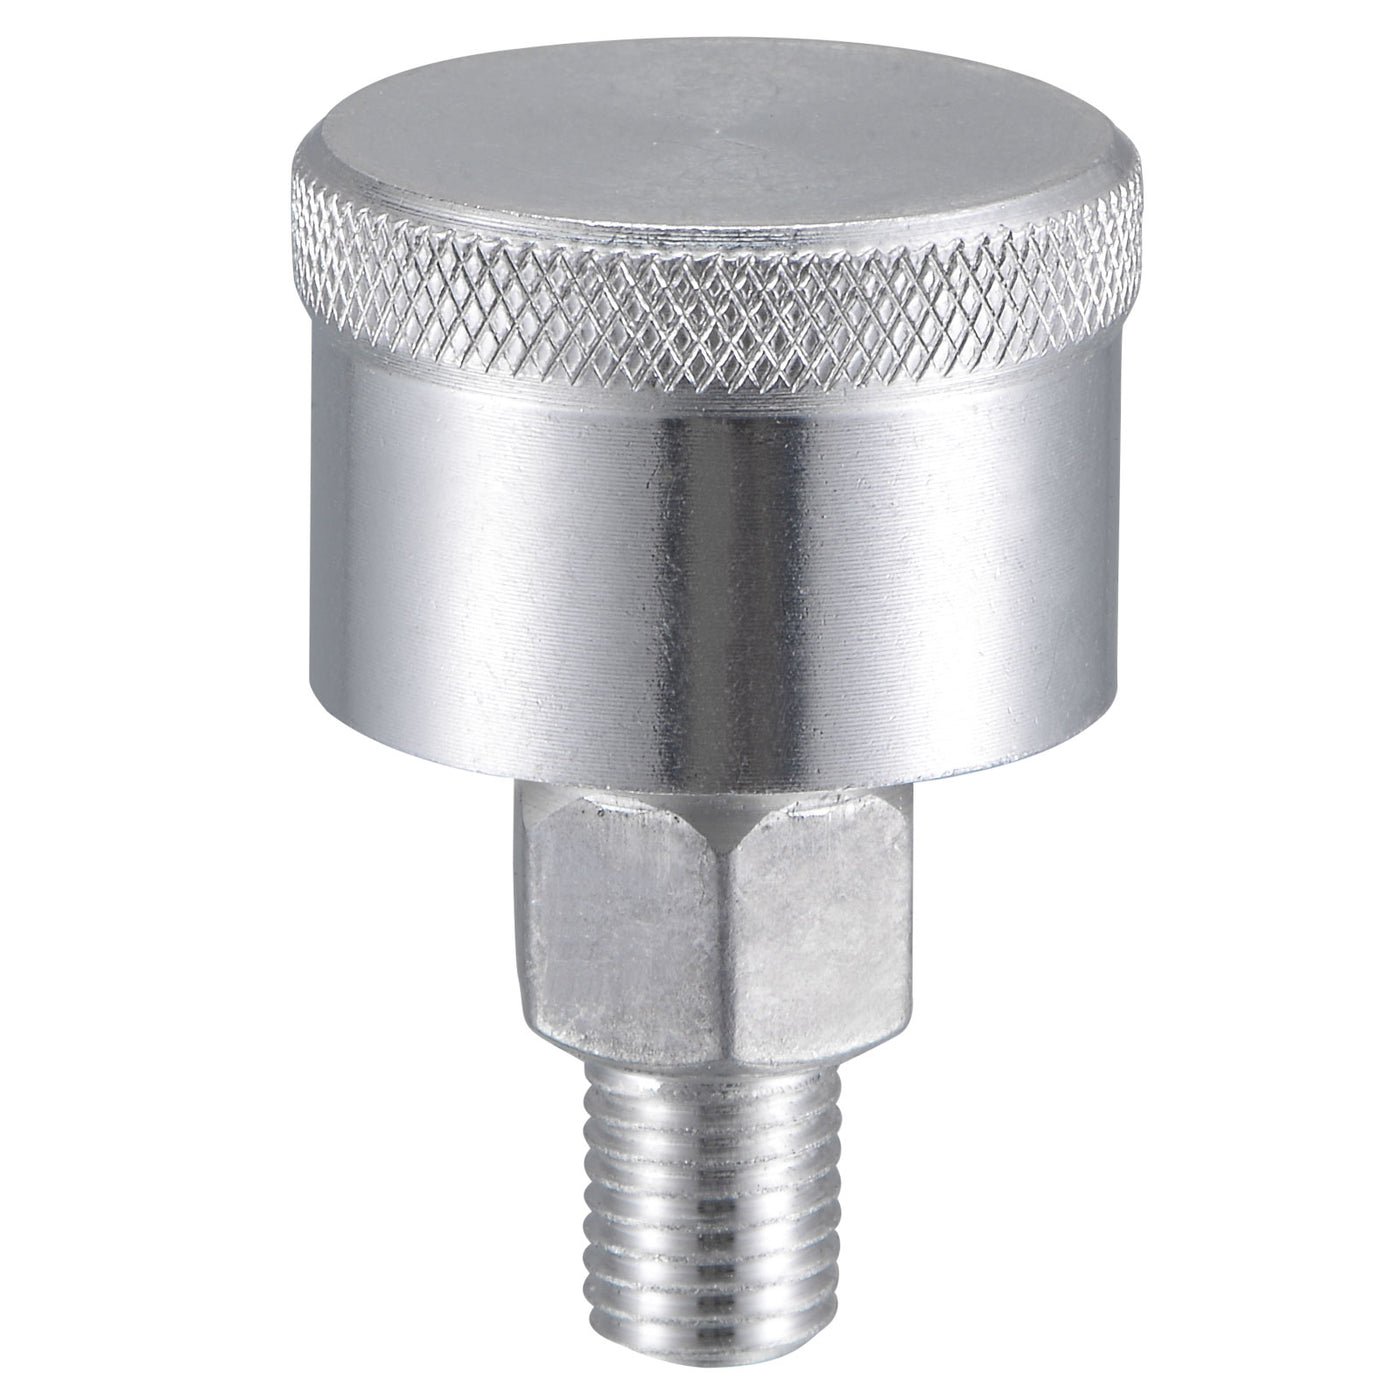 Uxcell Uxcell Machine Parts M10x1 Male Thread 1.5ml Grease Oil Cup Cap Aluminium Silver